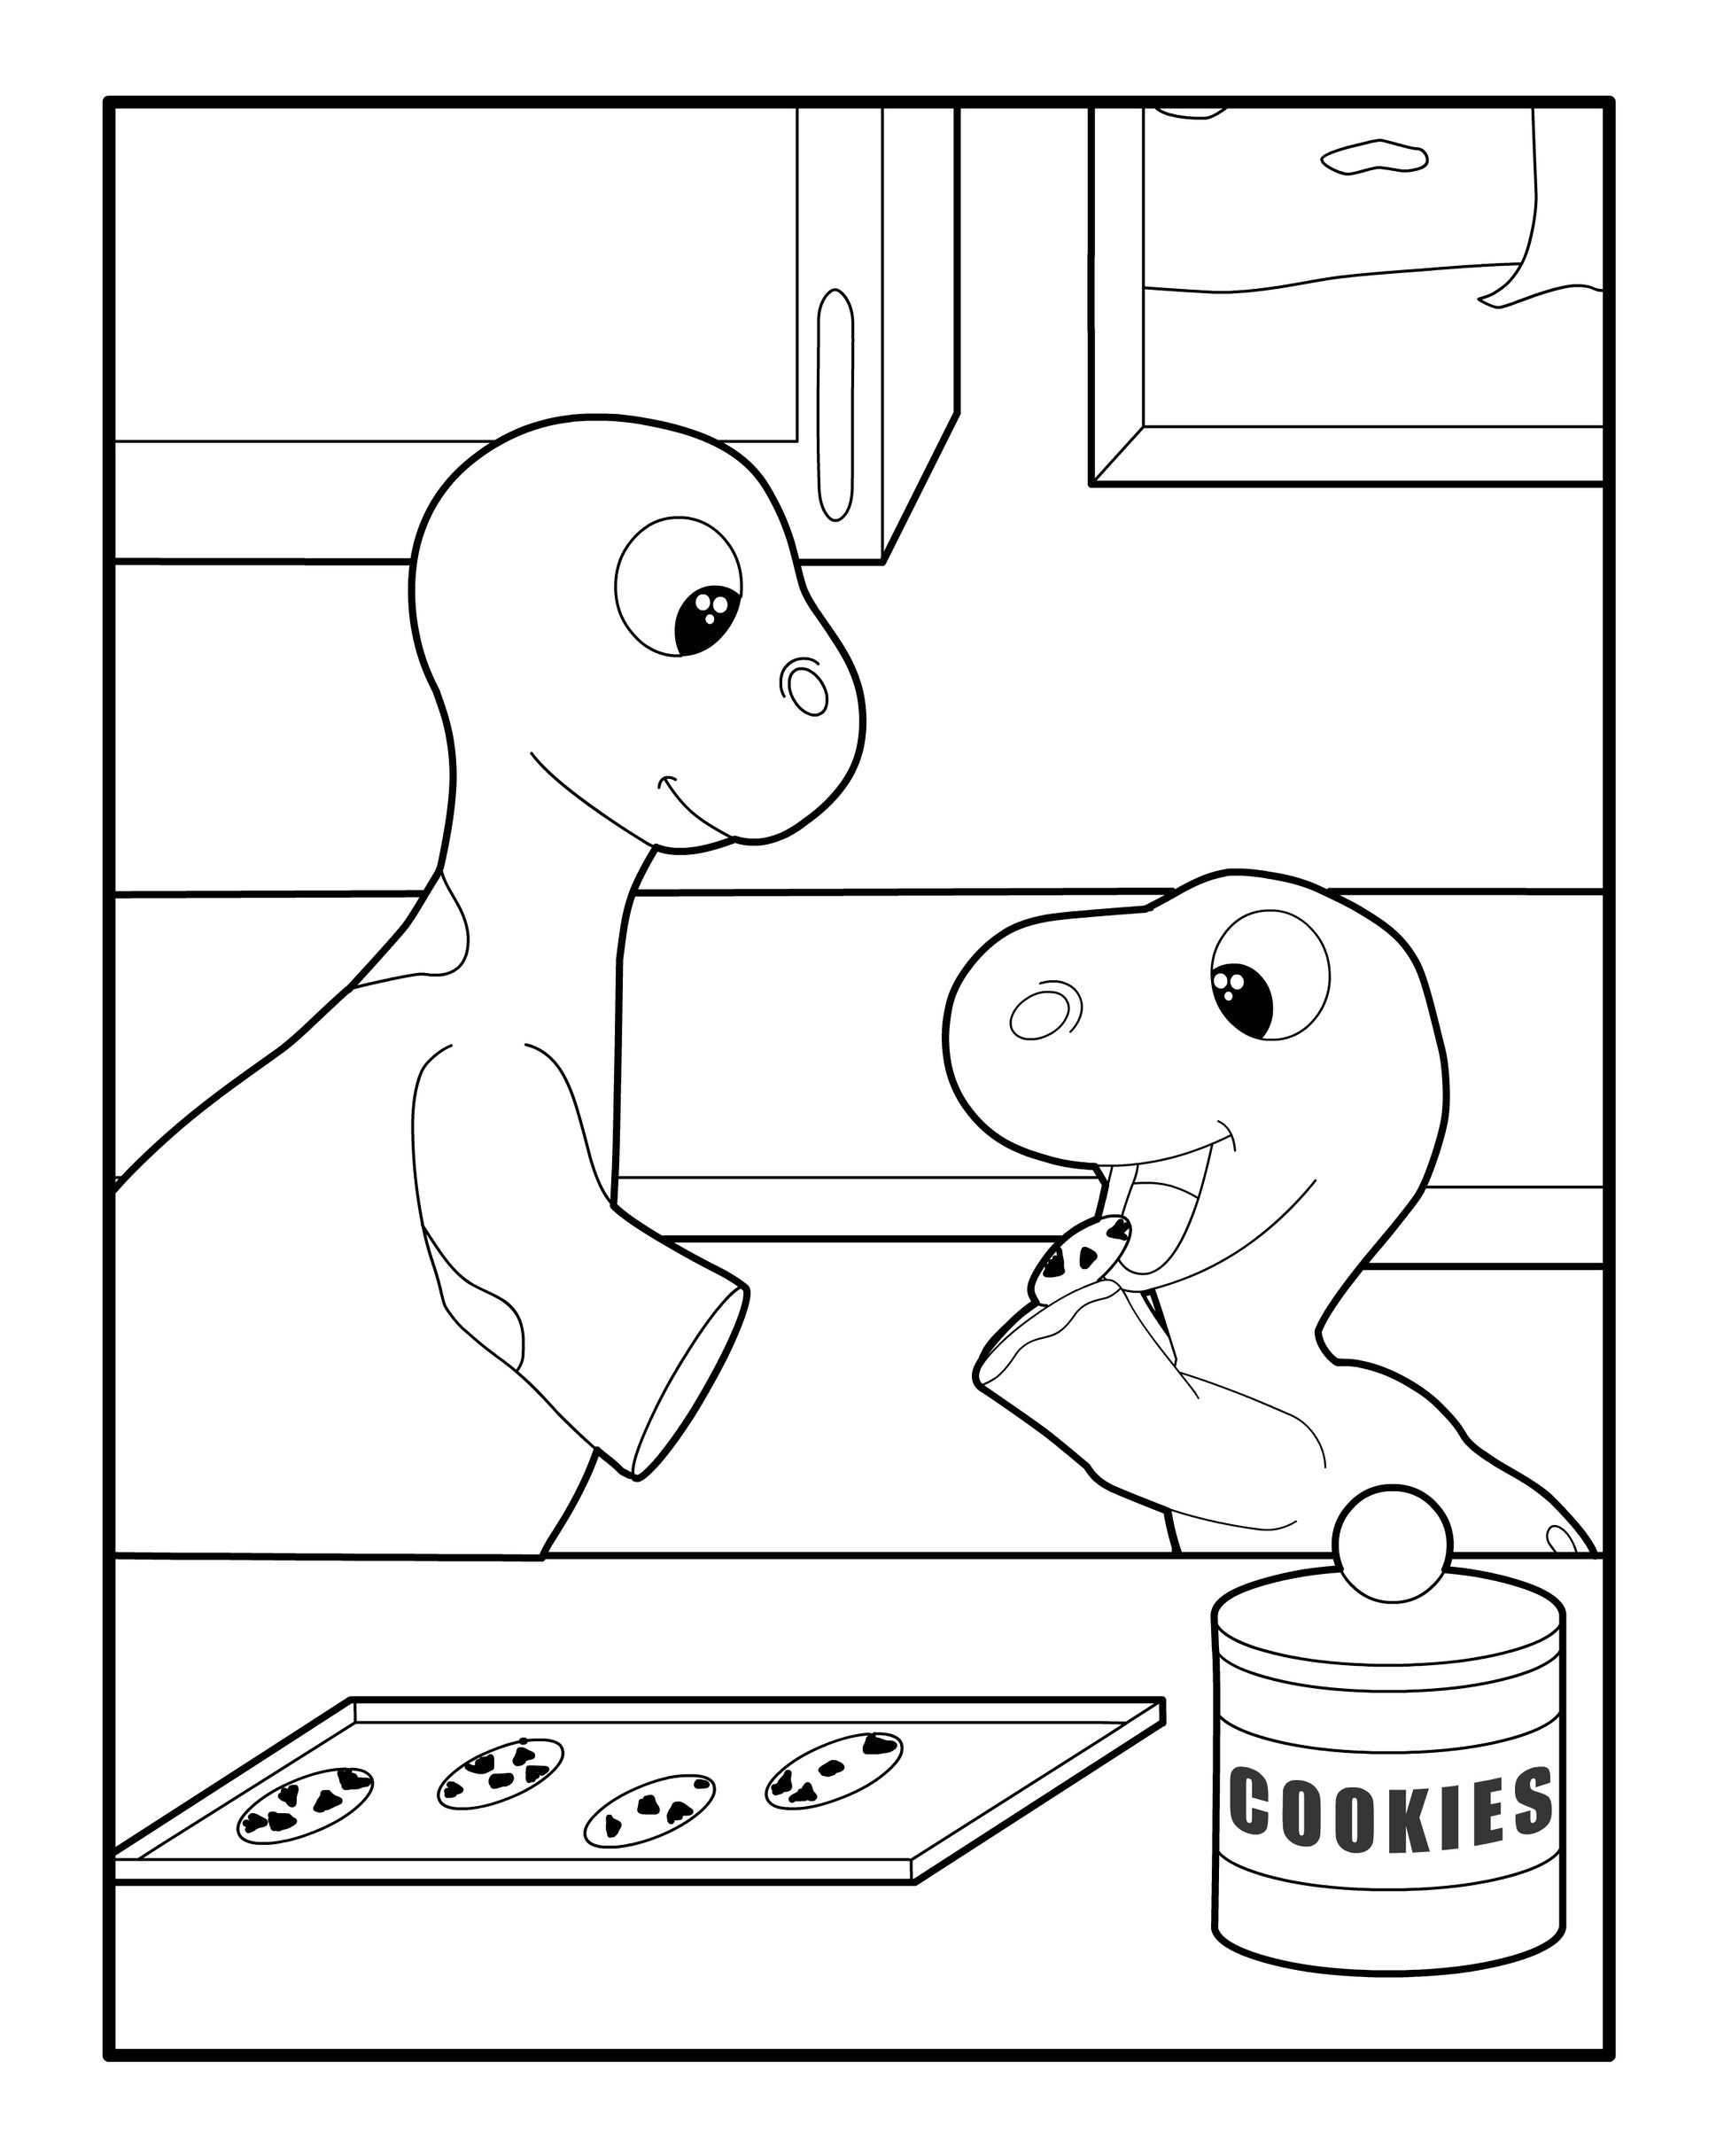 Black and white coloring page featuring two cartoon dinosaurs in a kitchen. One dinosaur is standing, looking at a cookie jar labeled 'COOKIES' while the other is sitting, gleefully munching on a cookie. There's a tray of cookies on the countertop.